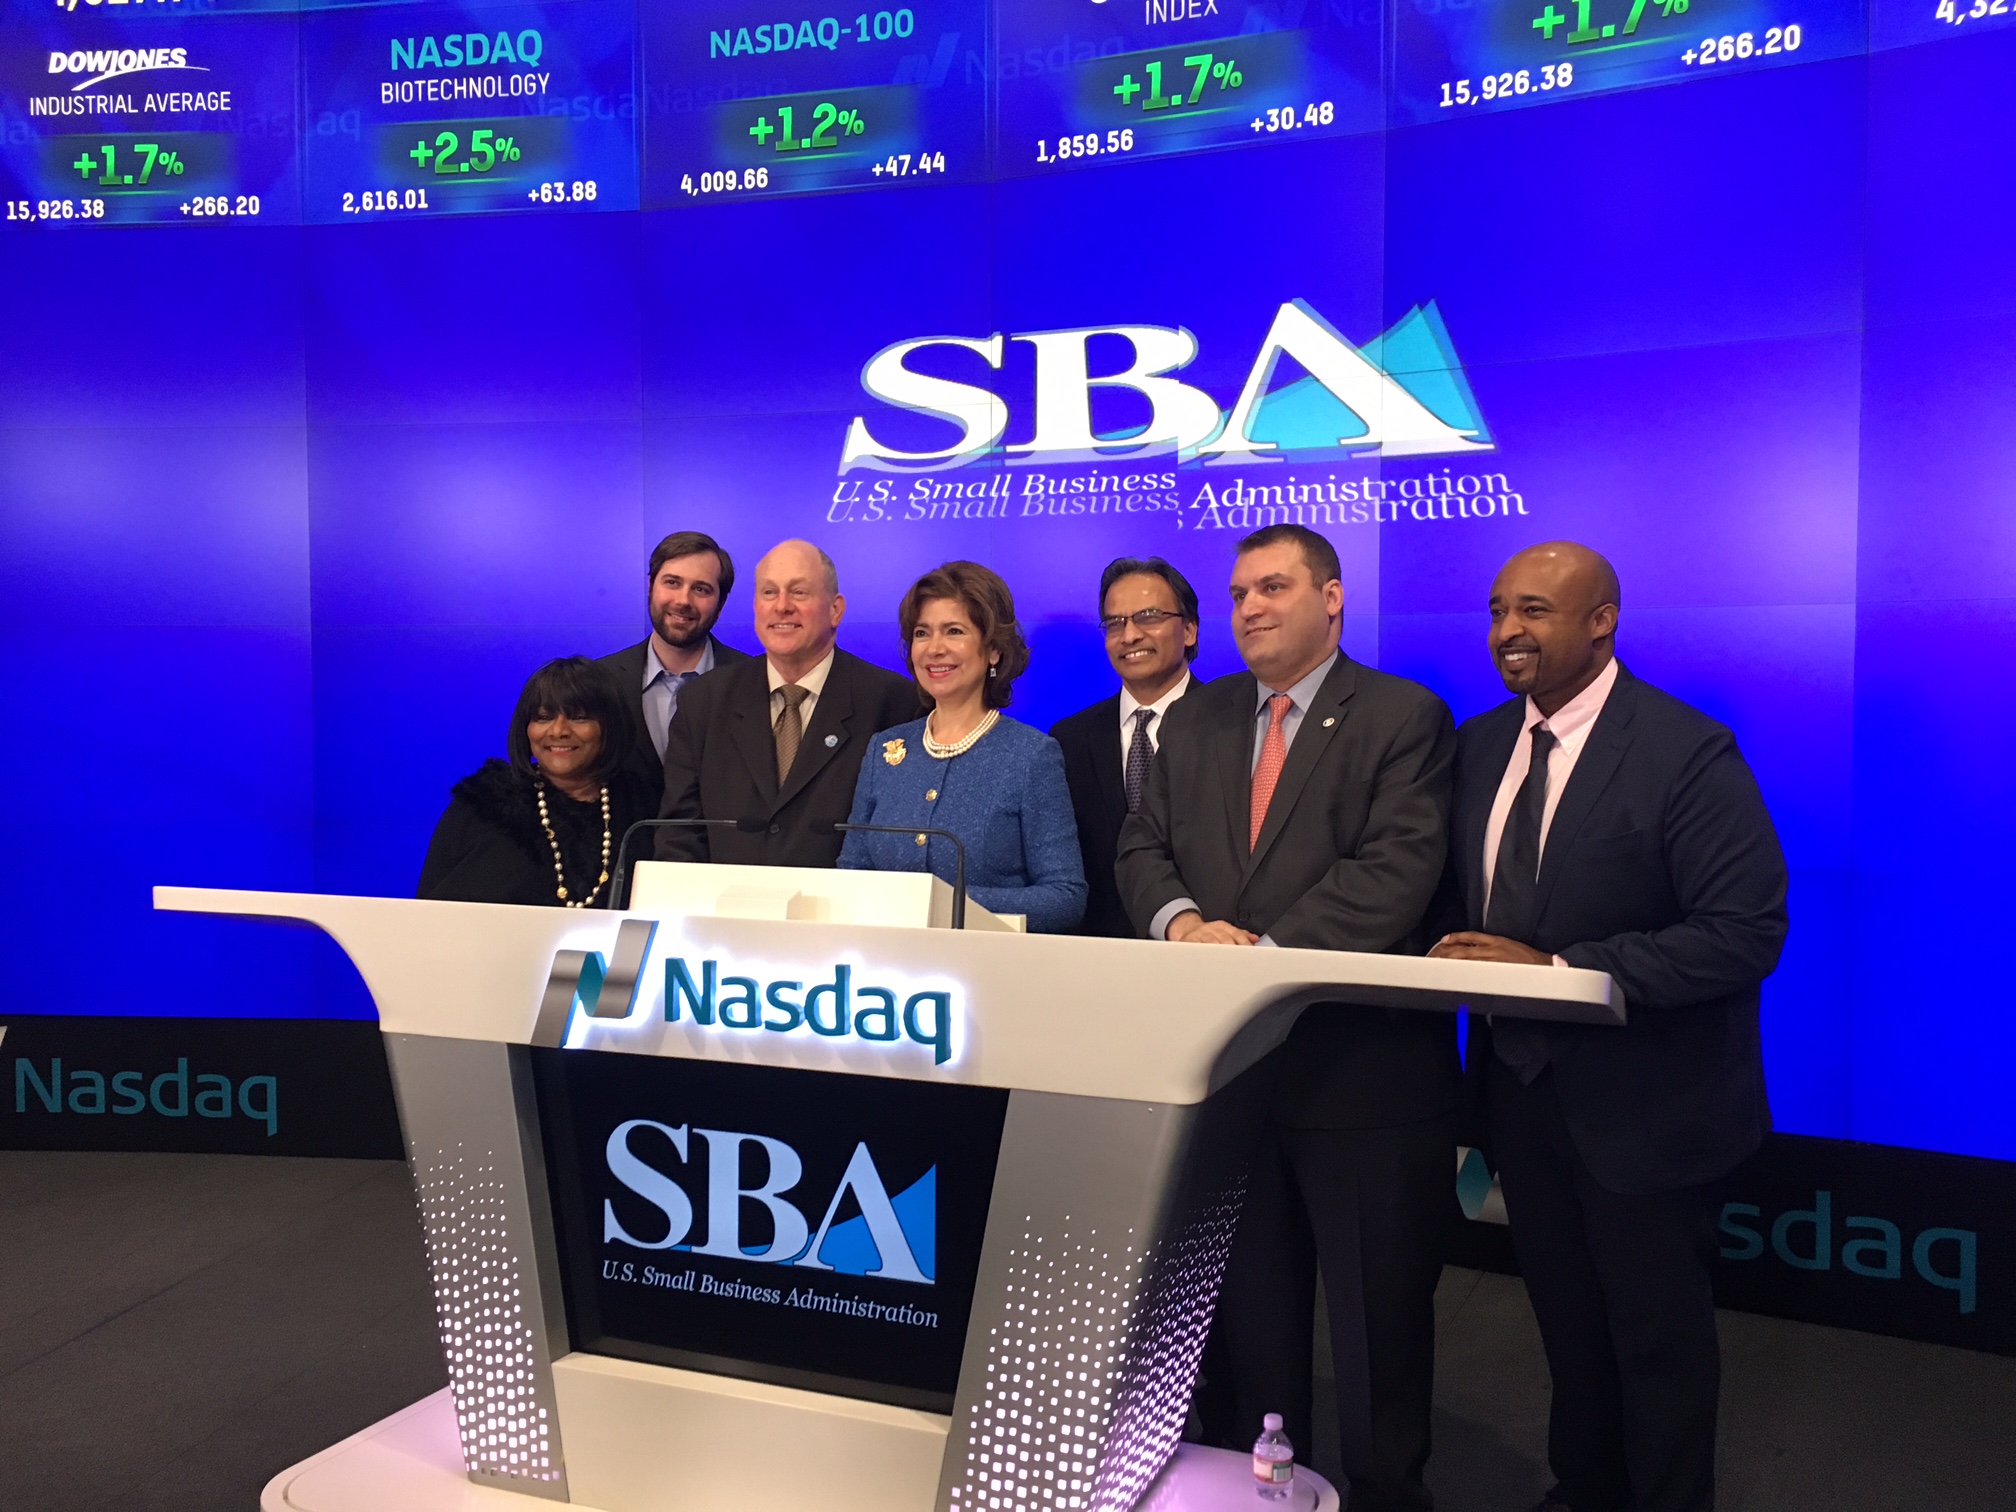 SBA Emerging Business Leader Aziz Ahmad, CEO of UTC Associates, joins Maria Contreras-Sweet, Administrator of SBA and a member of President Obama's cabinet, in NASDAQ closing Bell ceremony.